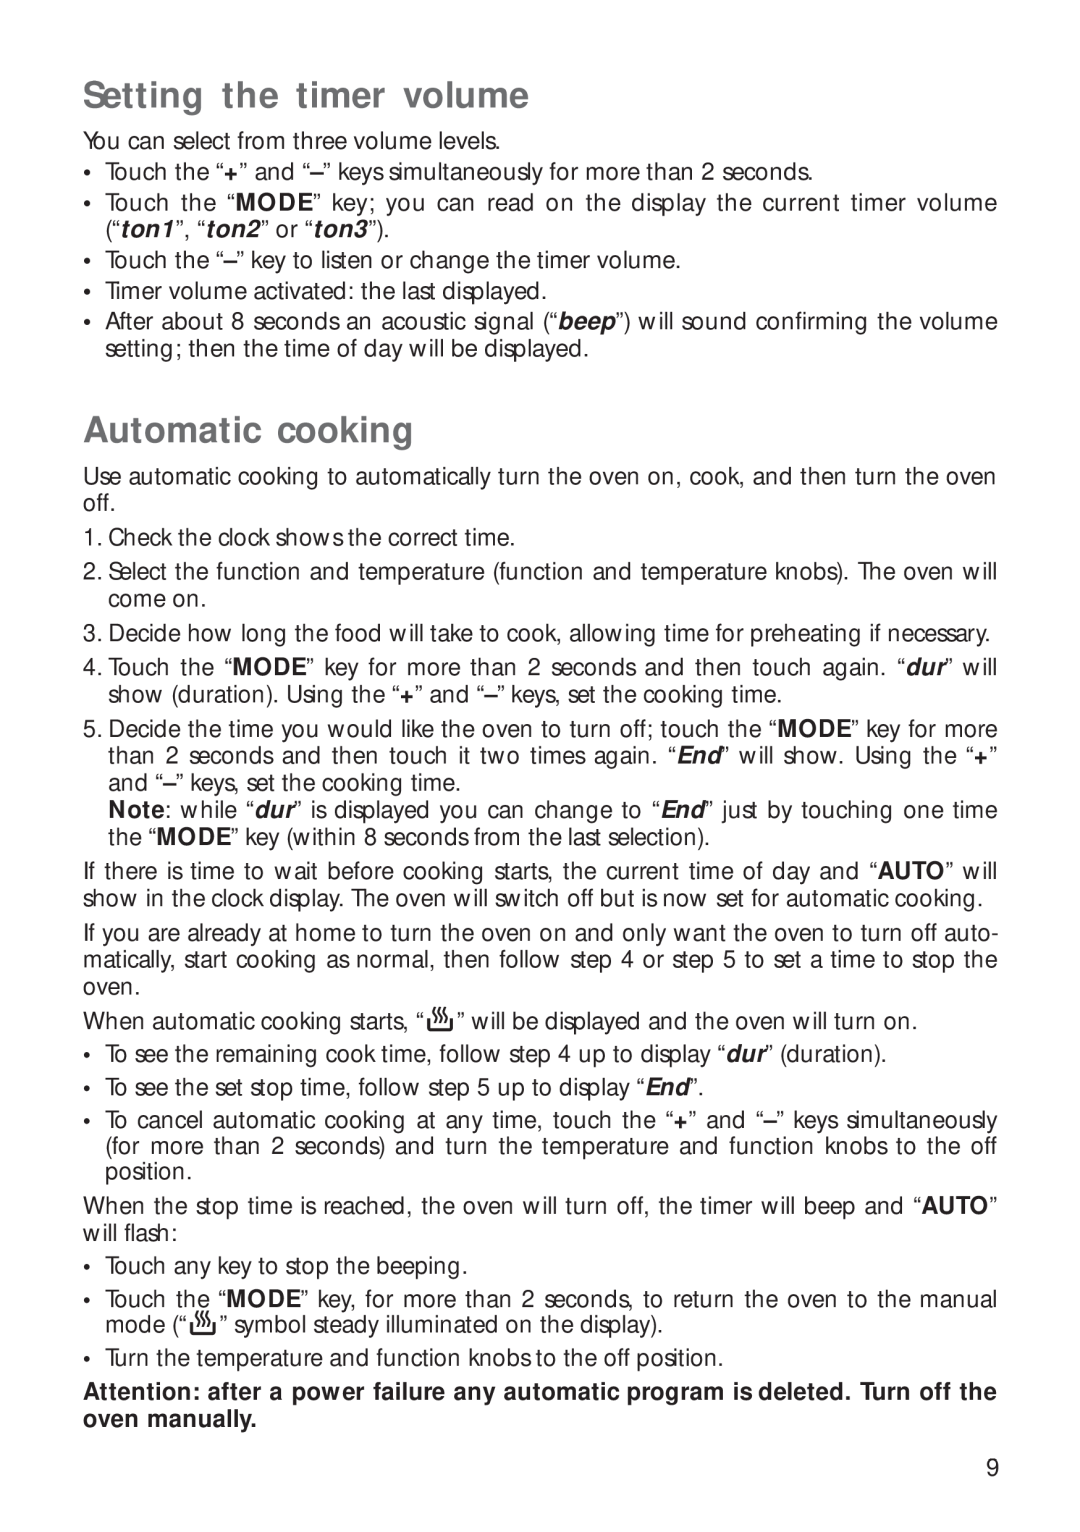 CDA RV 700 installation instructions Setting the timer volume, Automatic cooking 